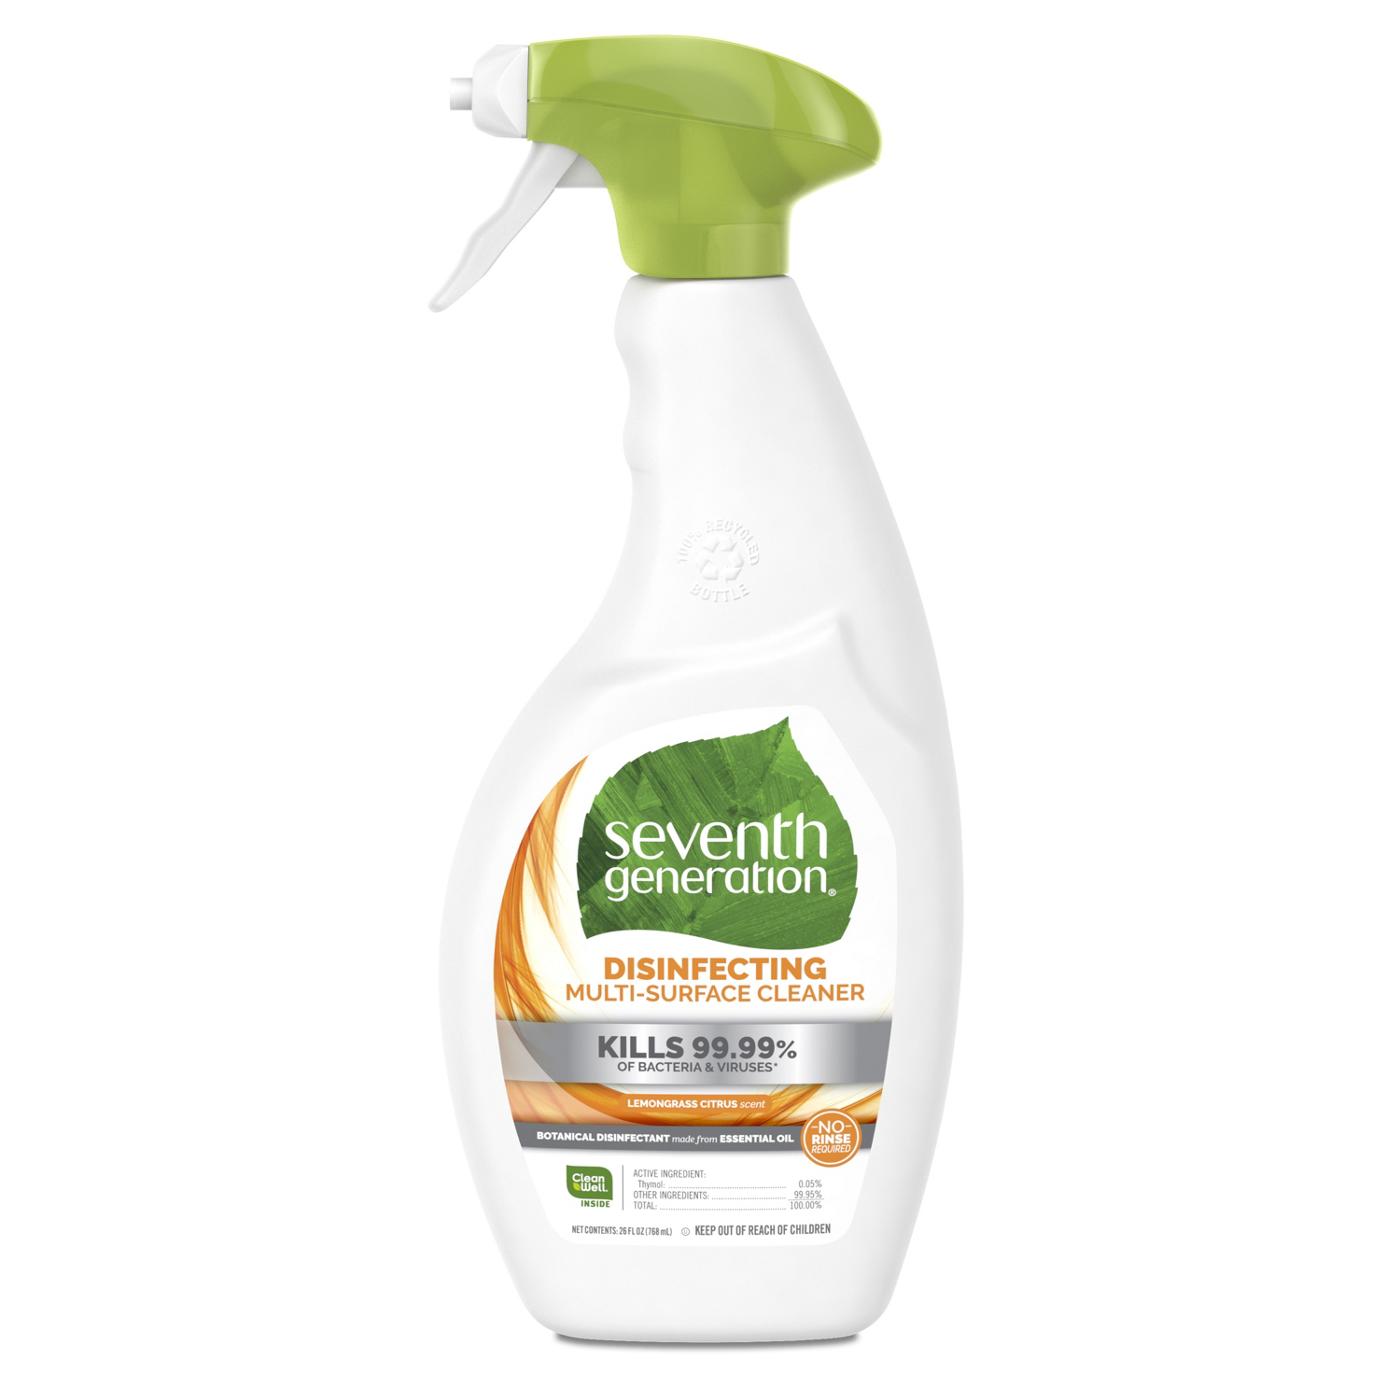 Seventh Generation Disinfecting Multi-Surface Cleaner; image 1 of 9